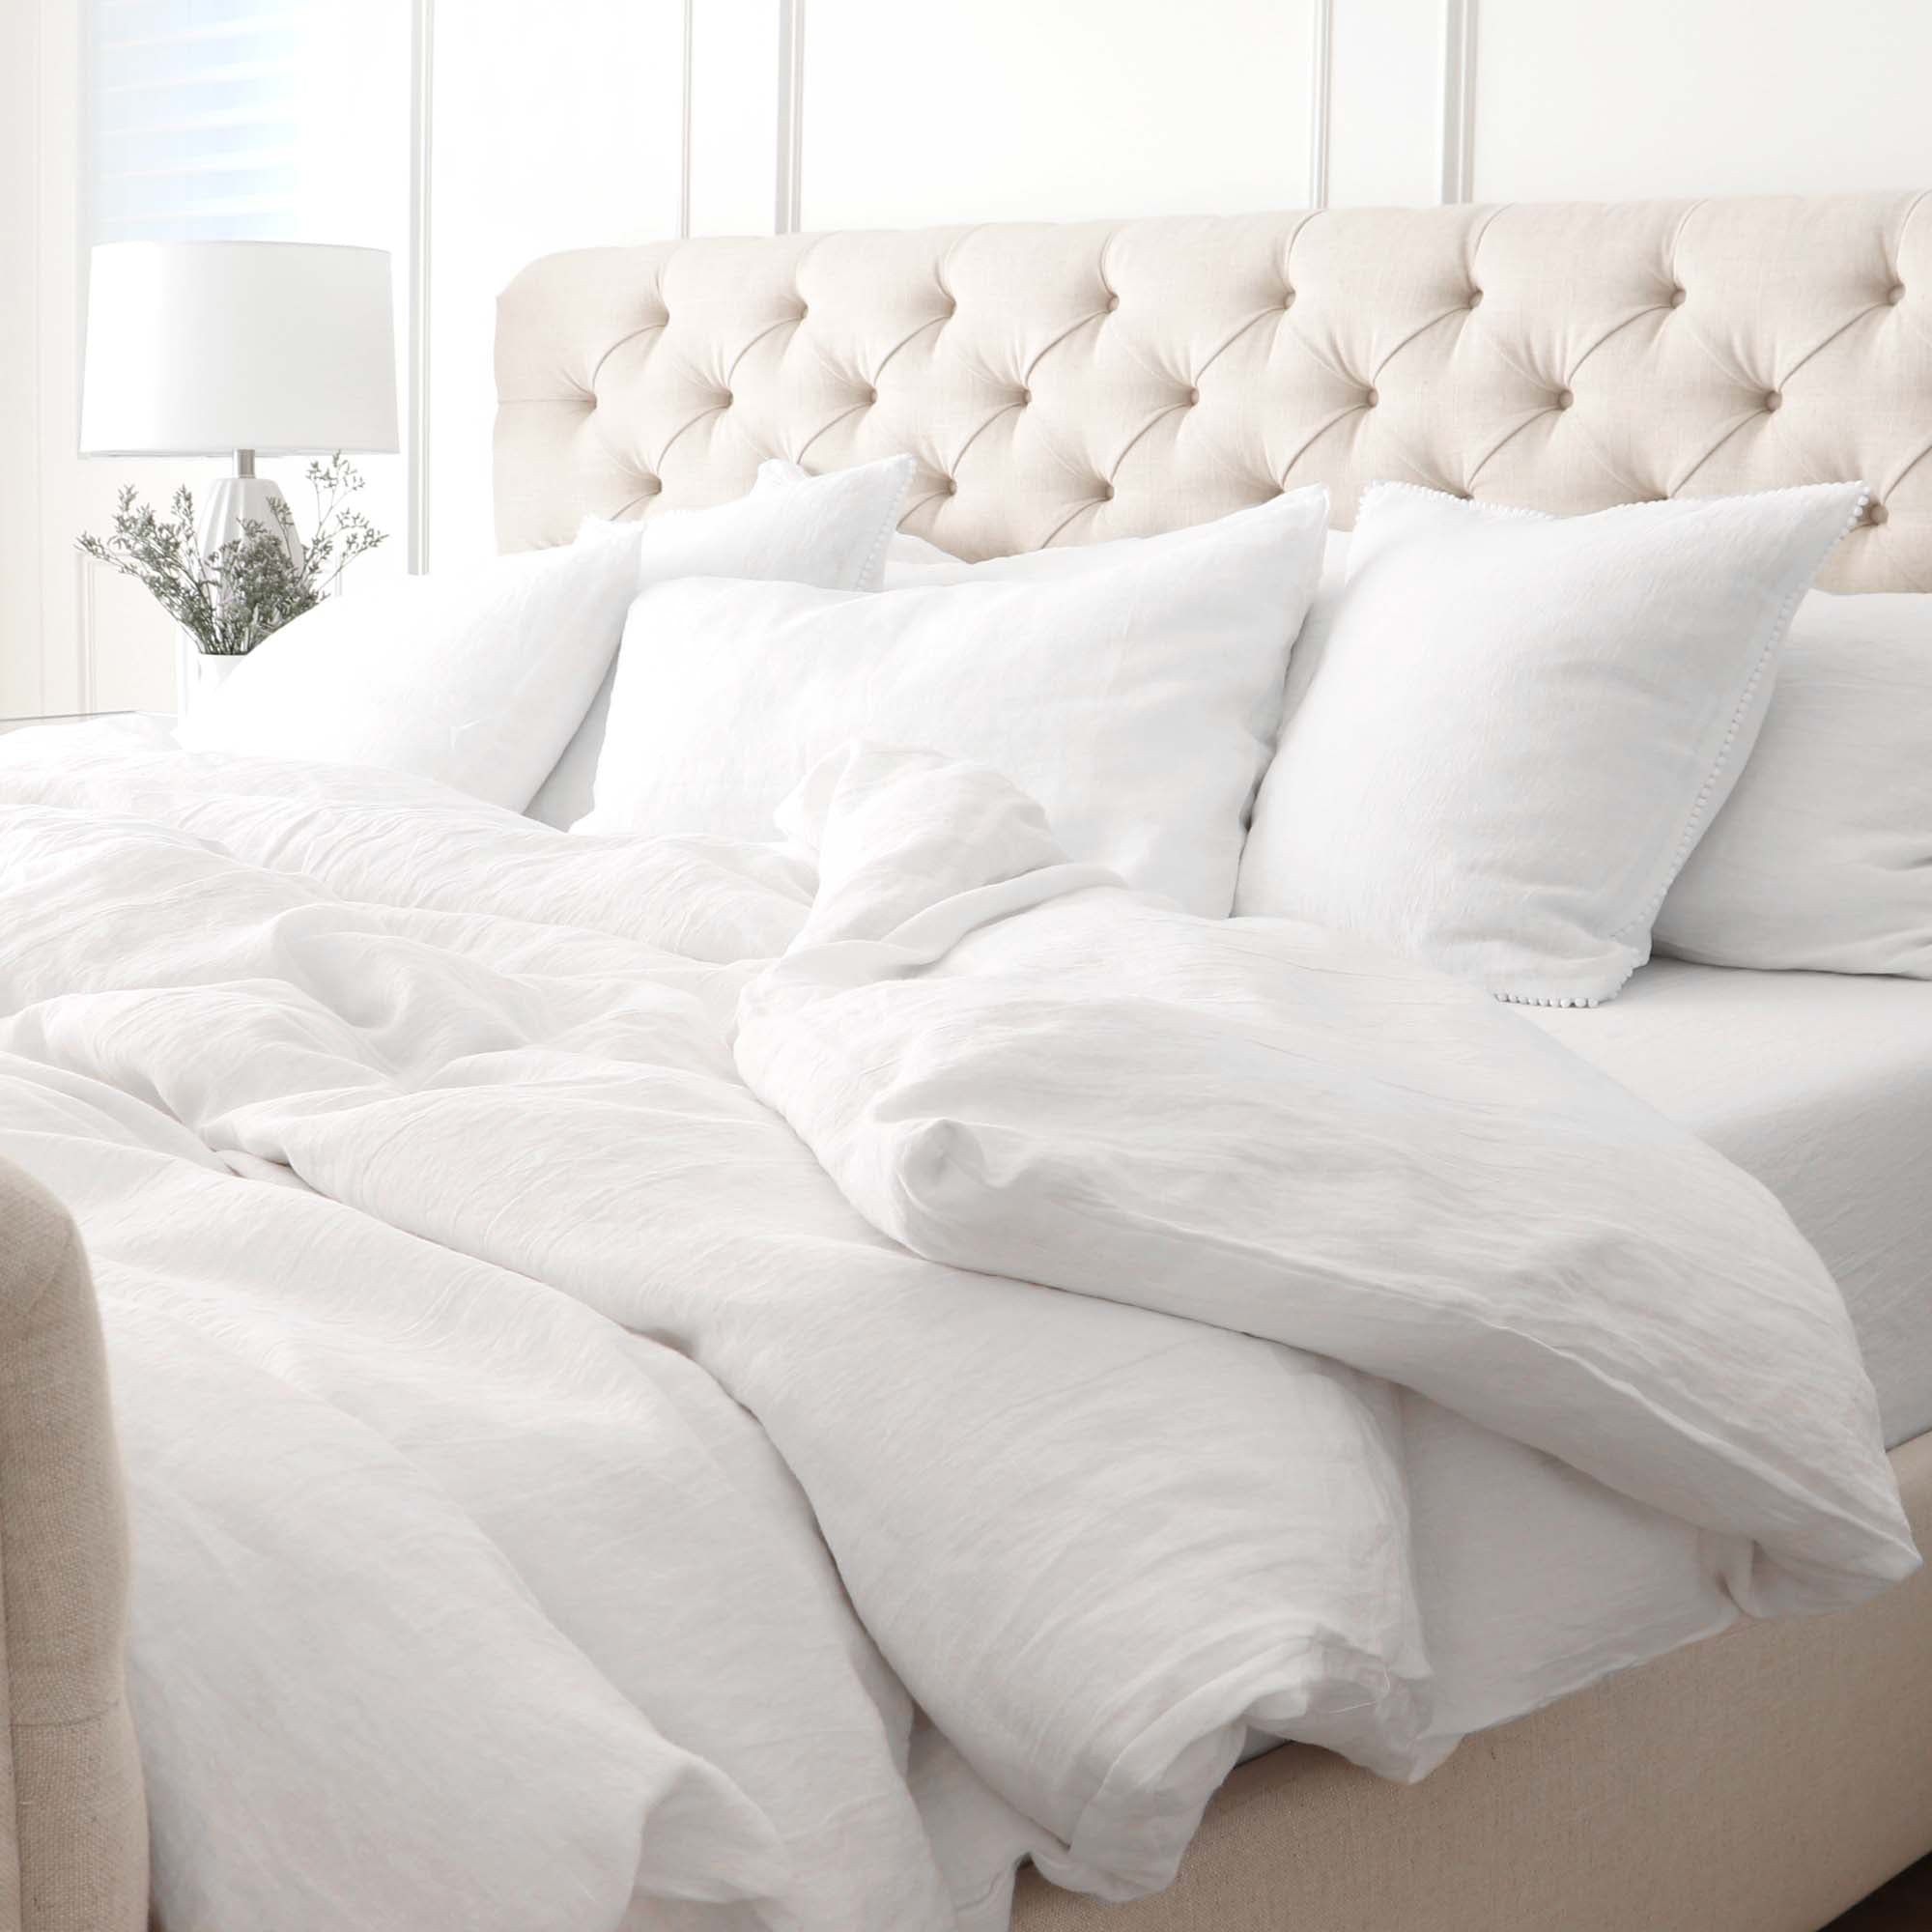 https://www.chloeandolive.com/cdn/shop/products/European_White_Linen_OEKO-TEX_Bedding_with_Pillow_Case_Covers_with_Duvet_5000x.jpg?v=1606881796